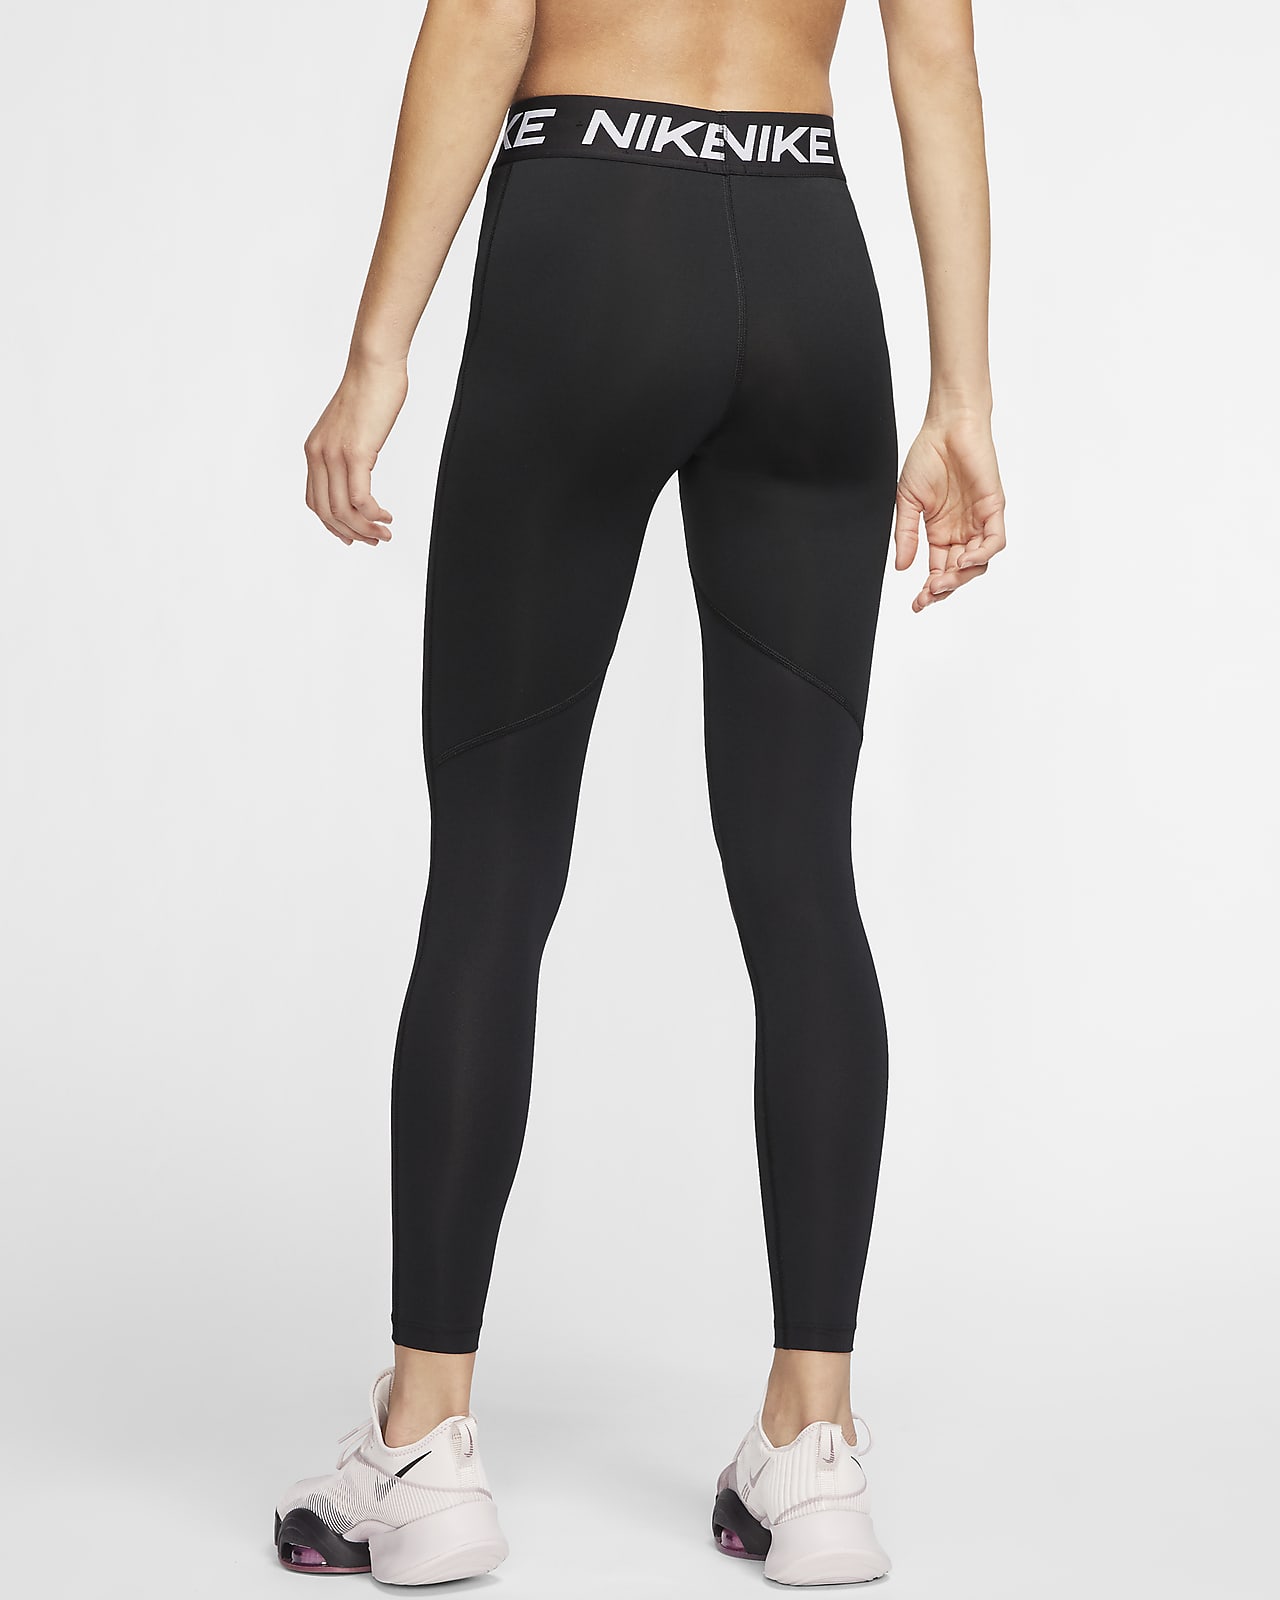 nike sculpture victory women's training tights